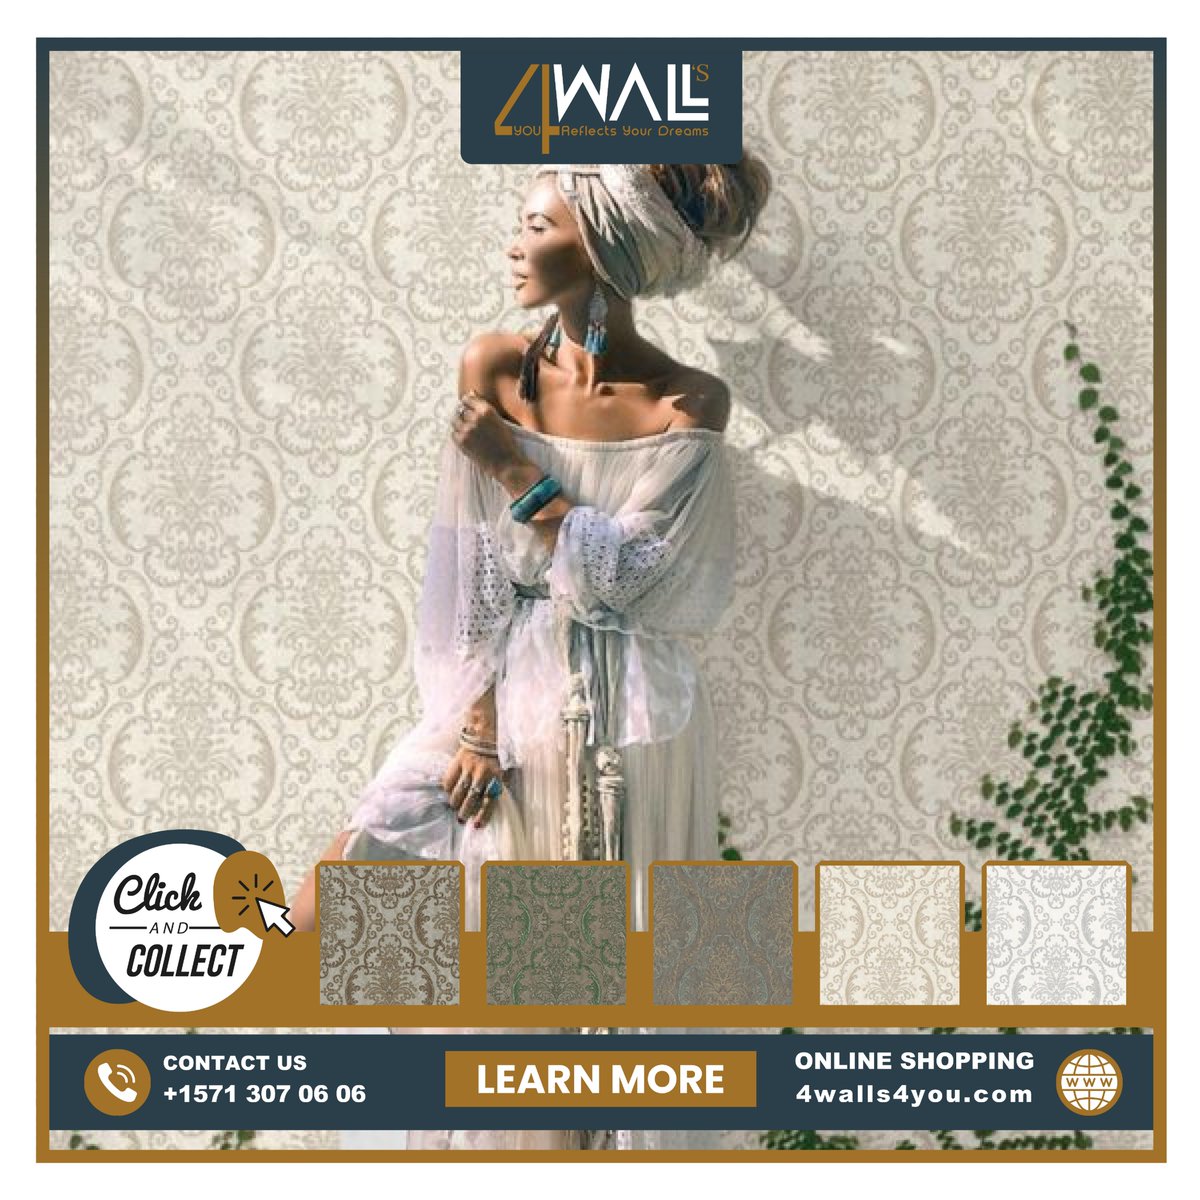 1312 Series | Damask Wallpaper
We believe that every design is unique and has its history and special individual charm. 
#wallpapersale #onlinewallpapersale #wallpaperdiscount #wallpaperonlinestore #wallpaperforsale #wallpaperdecor #interiordecorating #homedecor